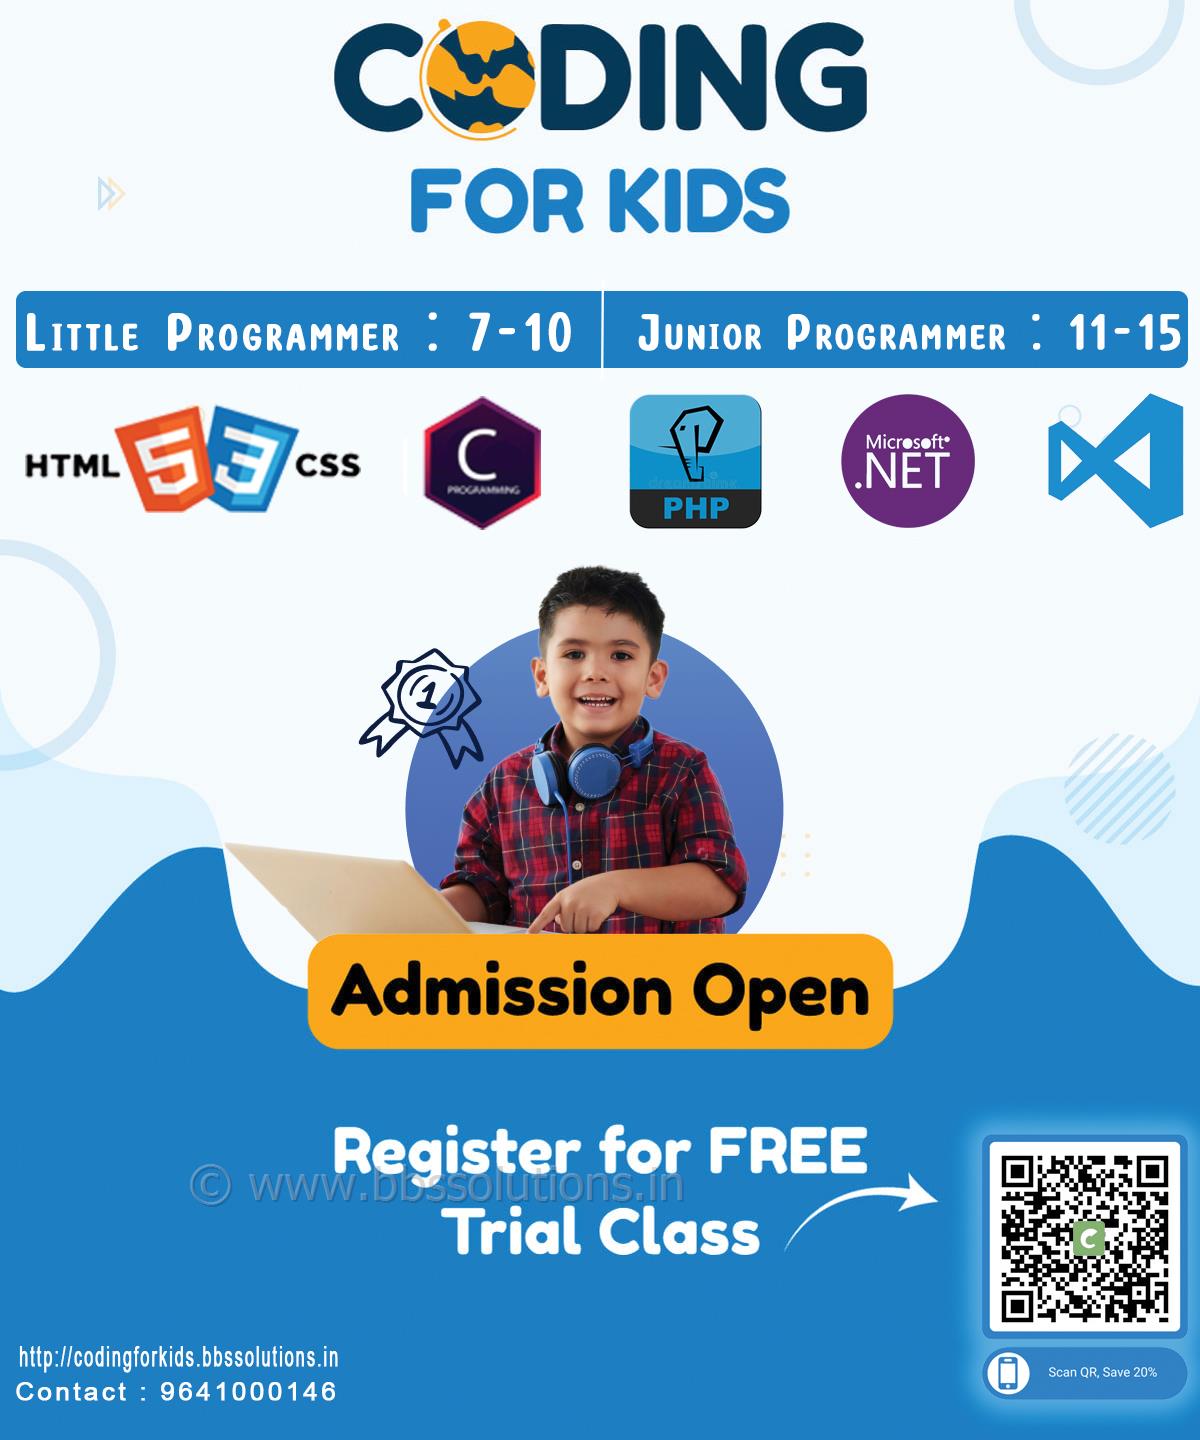 Unlock Your Child's Potential with Coding: Give Them a Head Start in the Digital World!  , Business Boost Software Solutions do Best Software ,Web Development,Mobile App solutions provider in siliguri , india, WestBengal , Assam , Siliguri , Jalpaiguri ,Dhupguri,
    Best website designing in Siliguri with affordable packages and quick support. Get effective website design in Siliguri from best website designers. #bbssolutions , #SEO  , #DigitalMarketing  , #WebDesign  , #SoftwareDevelopment  , #FacebookAds  , #GoogleAds  , #GoogleSEO  , #WebsiteDesigning 
     , #Software  , #website  , #BusinessBoostSoftwareSolutions  , bbssolutions,SEO, Digital Marketing, WebDesign, Software Development, Facebook Ads, Google Ads, Google SEO, Website Designing, 
    Software, website, Business Boost Software Solutions, 9641000146,7478180650,best GST software in West bengal,Best GST software company in north bengal,GST solution in west bengal
    ,gst solutions in north bengal,best customize software in siliguri , india,best customize software in west bengal,best customize software in dhupguri,news portal website in west bengal
    ,news portal website in siliguri , india,regional news portal website in siliguri , india,school software in west bengal,school software in north bengal,school website in north bengal,
    school software in north bengal,android app, ios app, ecommerce website, ecommerce software,Web designing, website designing, ecommerce website, how to make website, create website, 
    website development company, web page design, seo, search engine optimization, seo siliguri , india , 
    seo company, best seo company, seo services, responsive web design, web designing companies, 
    how to create a website, internet marketing, digital marketing, online marketing, social media marketing, 
    promotion,web designing in Siliguri,web designing in Siliguri siliguri , india,web designing in siliguri , india,GST Software  ,  GST Billing Software  ,  GST Accounting  ,  GST Ready Software,
    software company in siliguri,software company in siliguri siliguri , india,software company in north east siliguri , india,
    school software in siliguri,school software in north east siliguri , india,customize software,free software demo,
    reasonable price software,cost effective software,resonable price software,free demo software,free software,best software support,free software support,best software company in siliguri , india,
    best software company in siliguri,MLM Software company in Siliguri,Binary Software company in Siliguri,
    top ten software company in north bengal,top ten software company in siliguri,top ten software company in siliguri , india,
    top ten software company in north east,software development siliguri , india,west bengal,kolkata,siliguri , software company in siliguri , india
     , software development west bengal , Customized software siliguri , india , software for hotel,medicine distributors,
    jewellery shop , best software company in siliguri,jalpaiguri,sikkim,darjeeling  , Business Boost Softwate Solutions  ,  
    Web designing company in siliguri  ,  ecommerce designing company in siliguri  ,  web development company in siliguri  ,  
    software development comapny in siliguri  ,  software development in sikkim  ,  website designing company in sikkim  ,  
    SEO service in sikkim  ,  web designing company in siliguri  ,  web designing compnay in North Bengal  ,  
    SEO service in siliguri  ,  web designing in north bengal  ,  web designing in north east siliguri , india , website designing in siliguri, best website designing in siliguri, web design, web designer in siliguri, web designing company siliguri